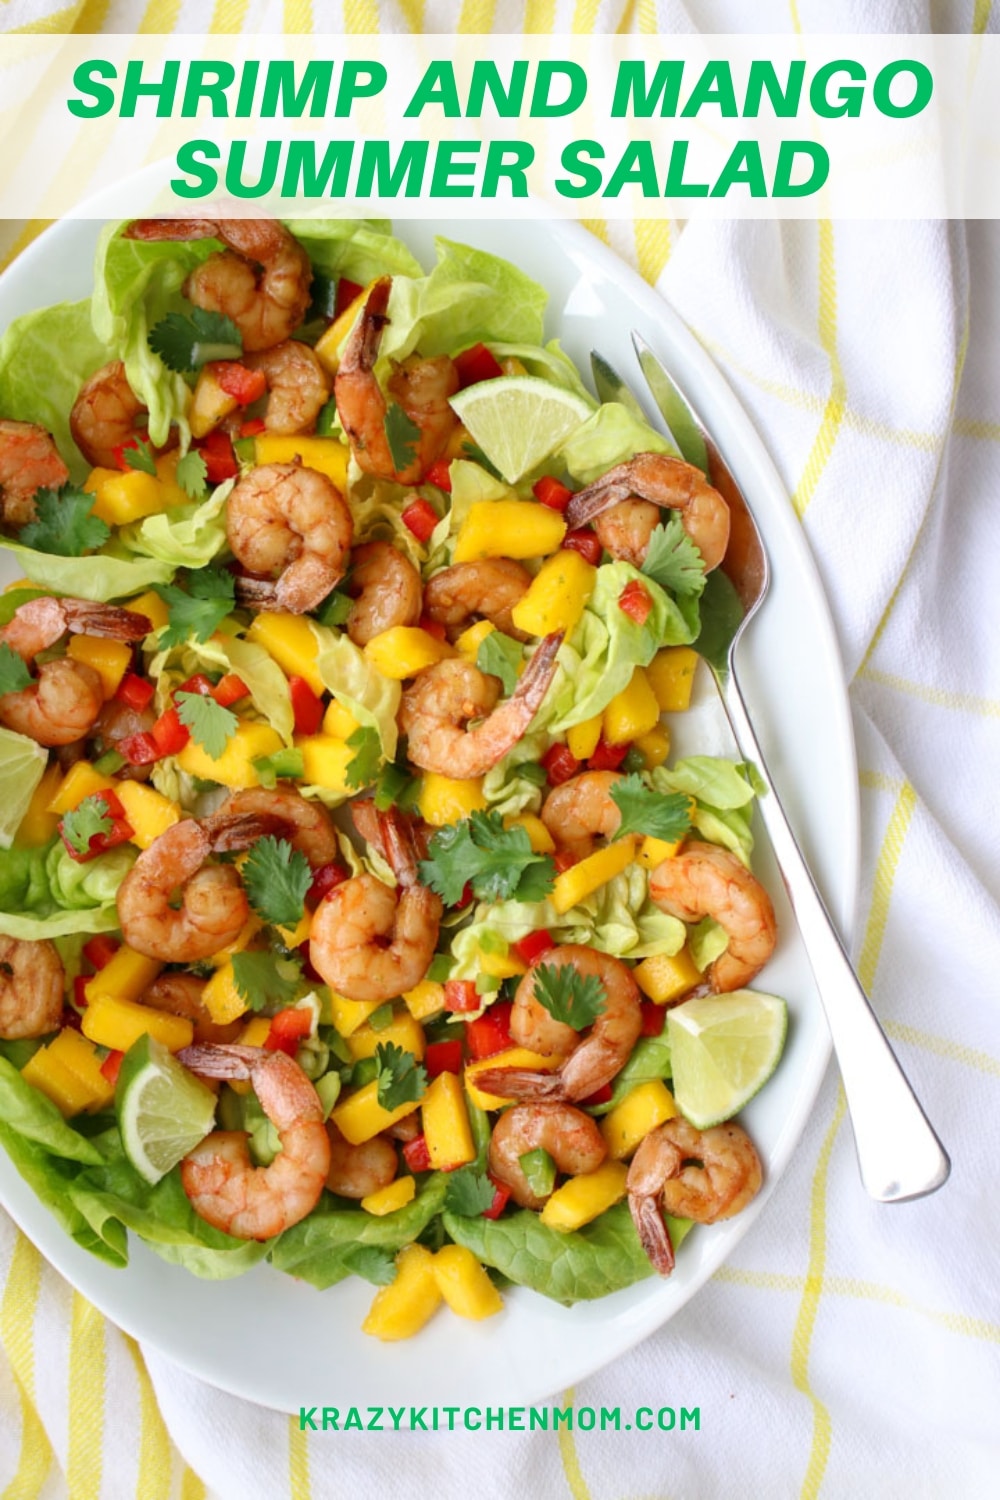 Nothing says summer like a refreshing salad. My delicious shrimp and mango summer salad has just what you're looking for to add flavor and zest to your al fresco dining. via @krazykitchenmom